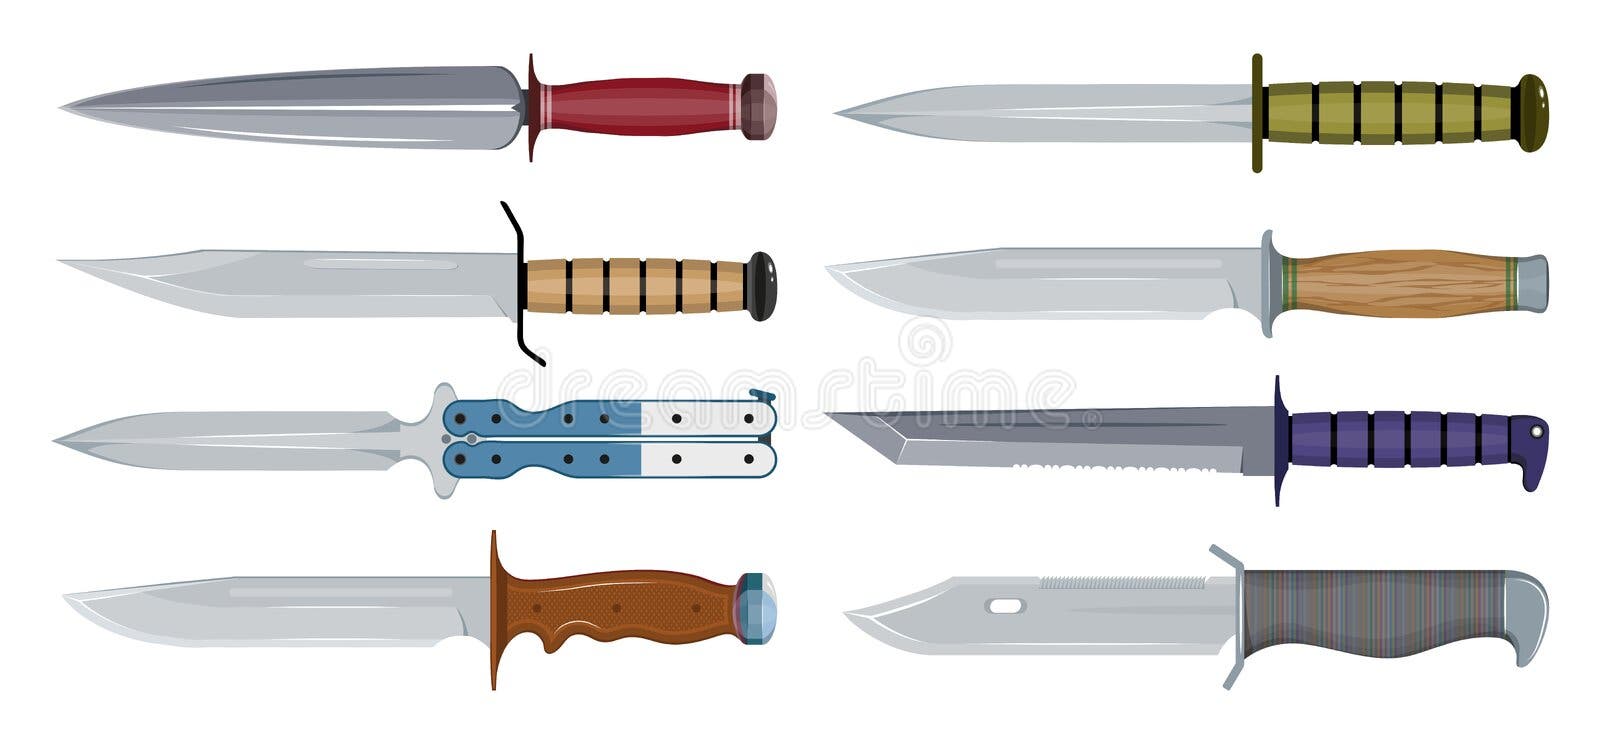 Types of Military Knives. Typical Hunter Knives. Blade Types. American ...